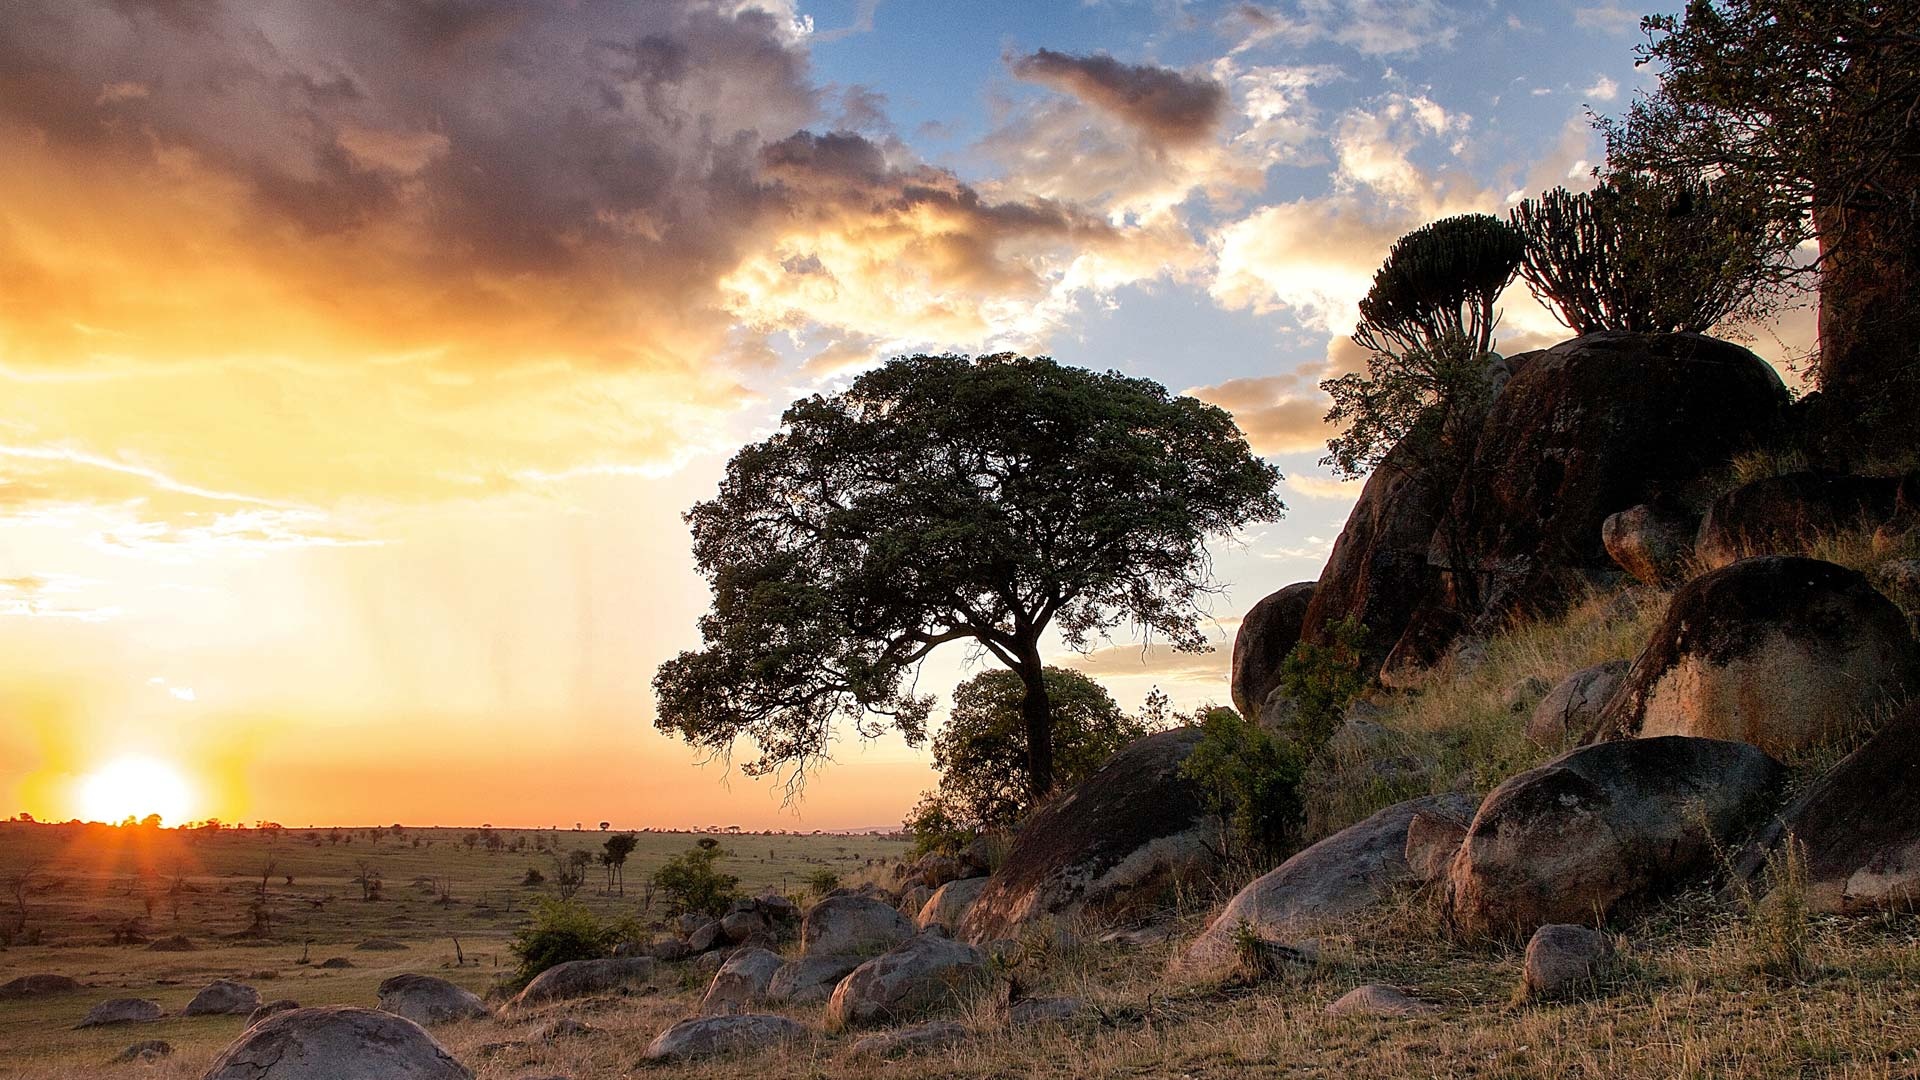 Serengeti National Park, Safaris and expeditions, Wildlife conservation, African wilderness, 1920x1080 Full HD Desktop